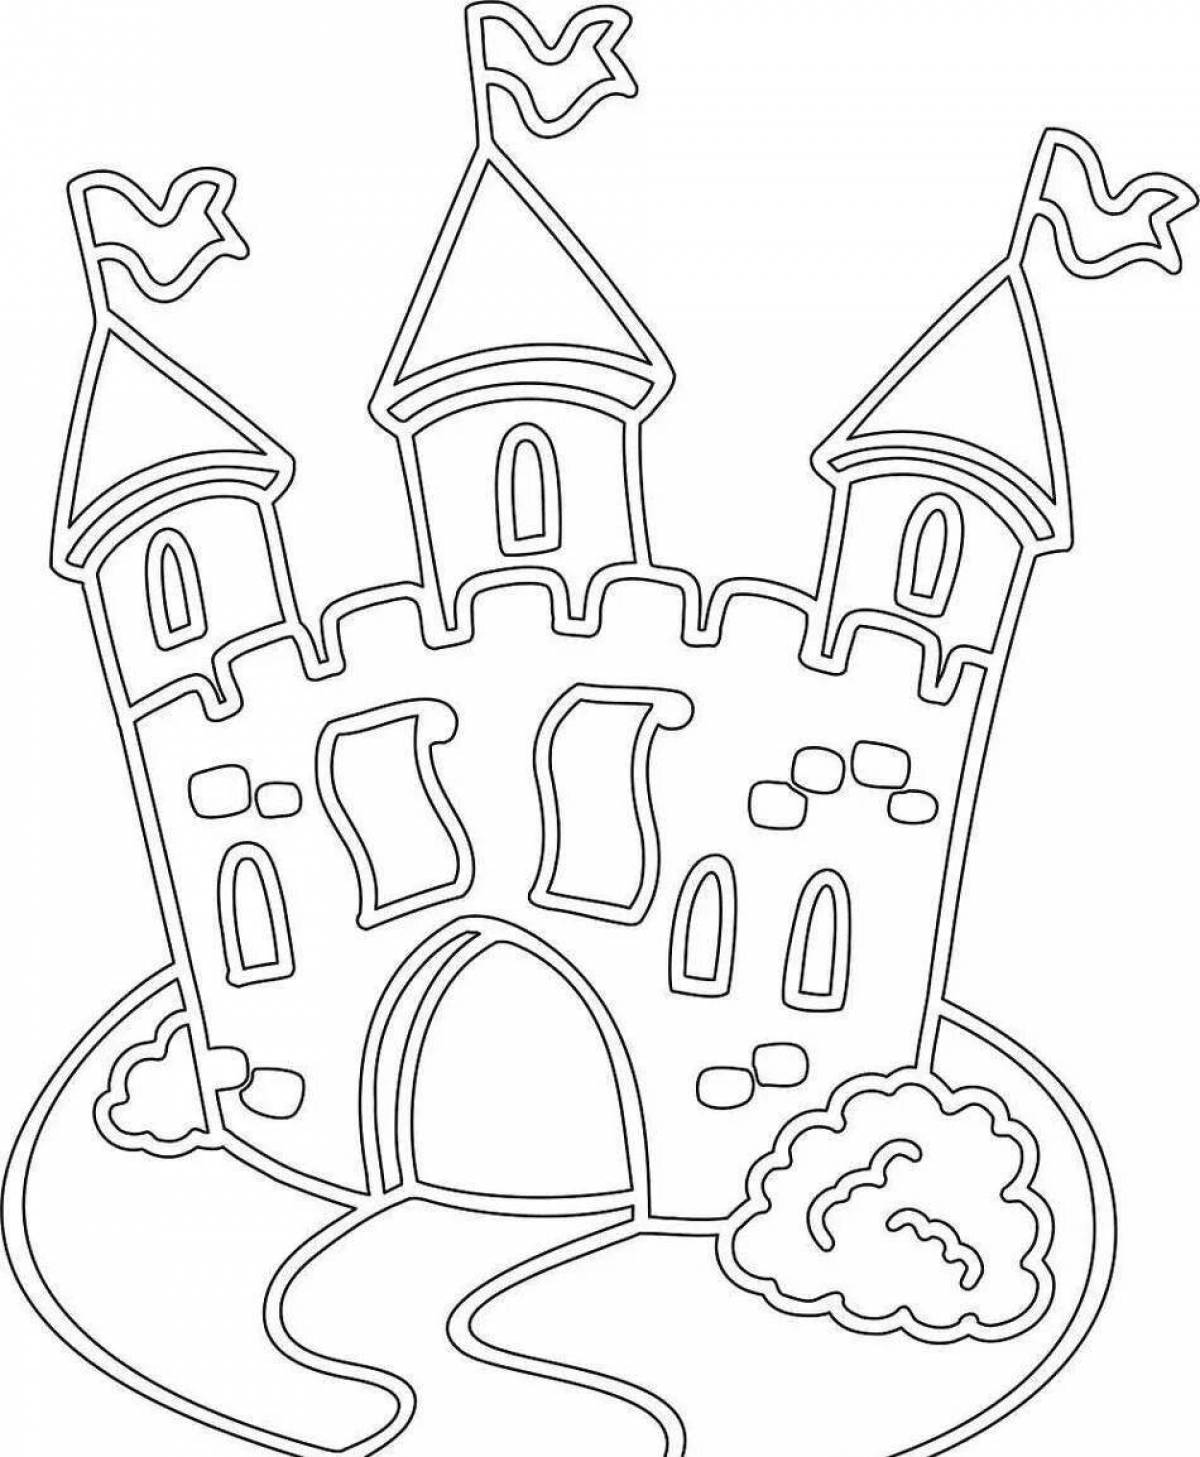 Amazing new year castle coloring pages